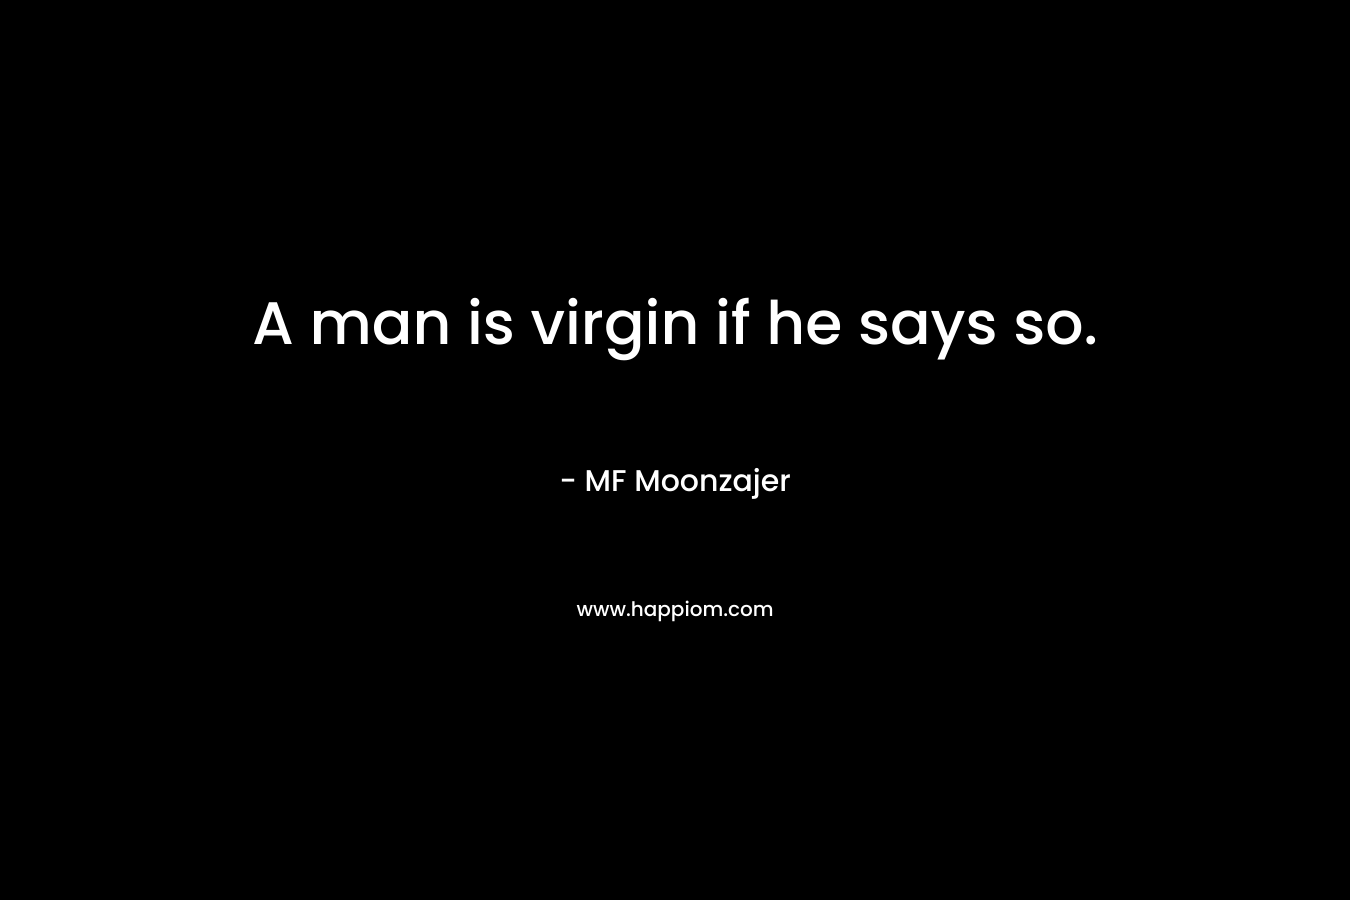 A man is virgin if he says so.